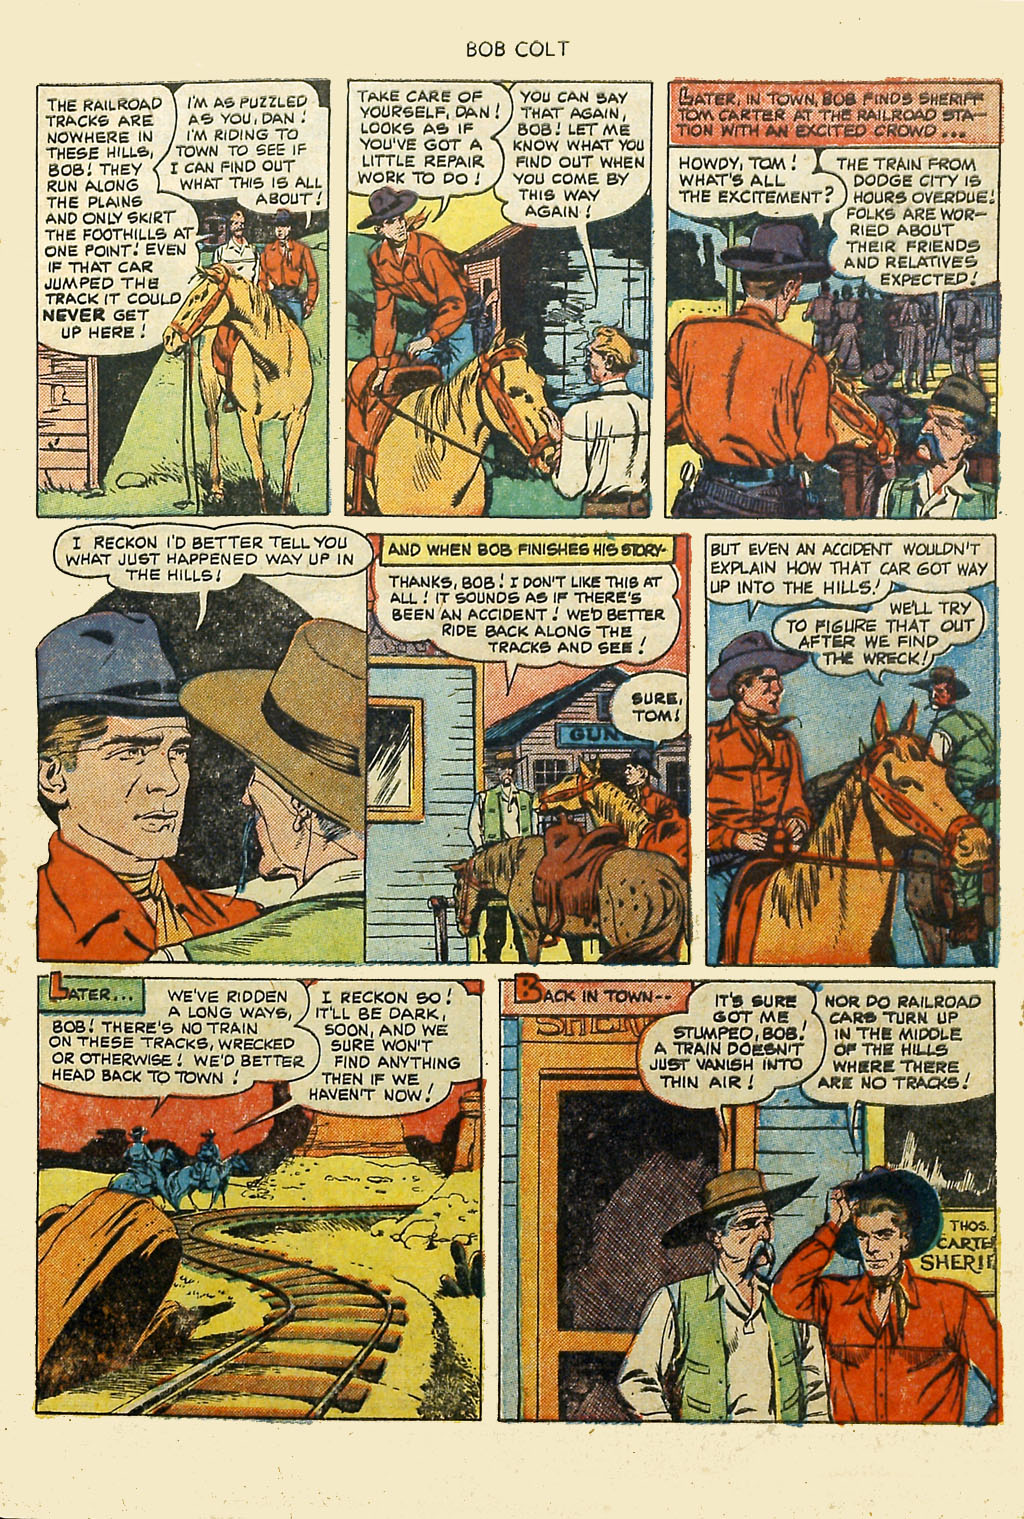 Read online Bob Colt Western comic -  Issue #2 - 5